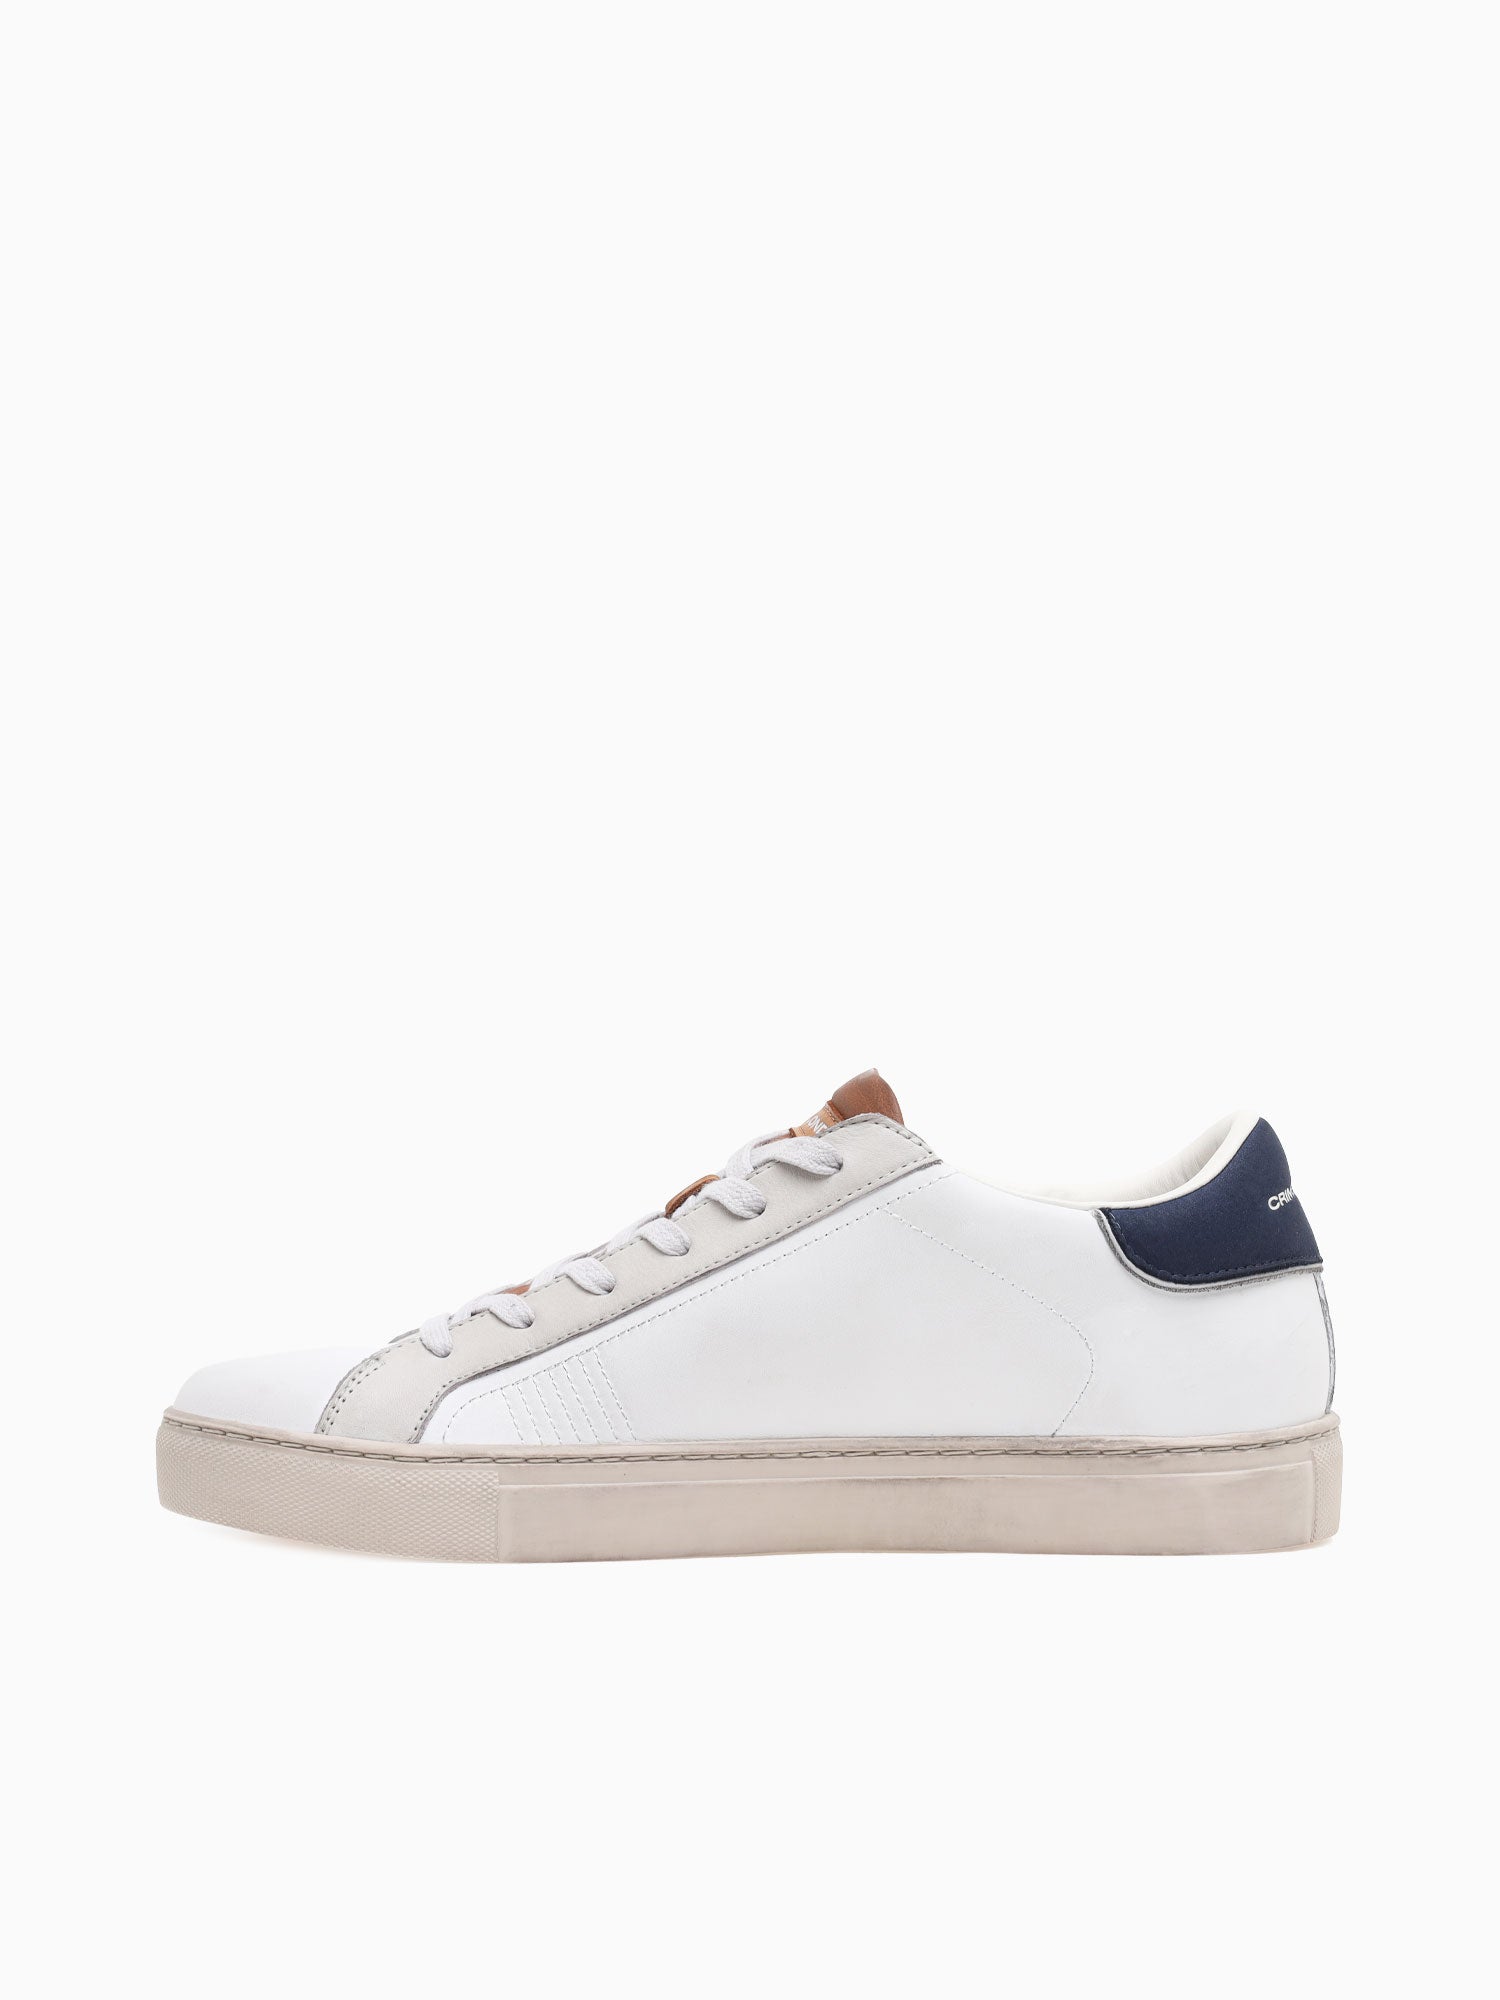 Low Top Essential White Leather White / 39 / M